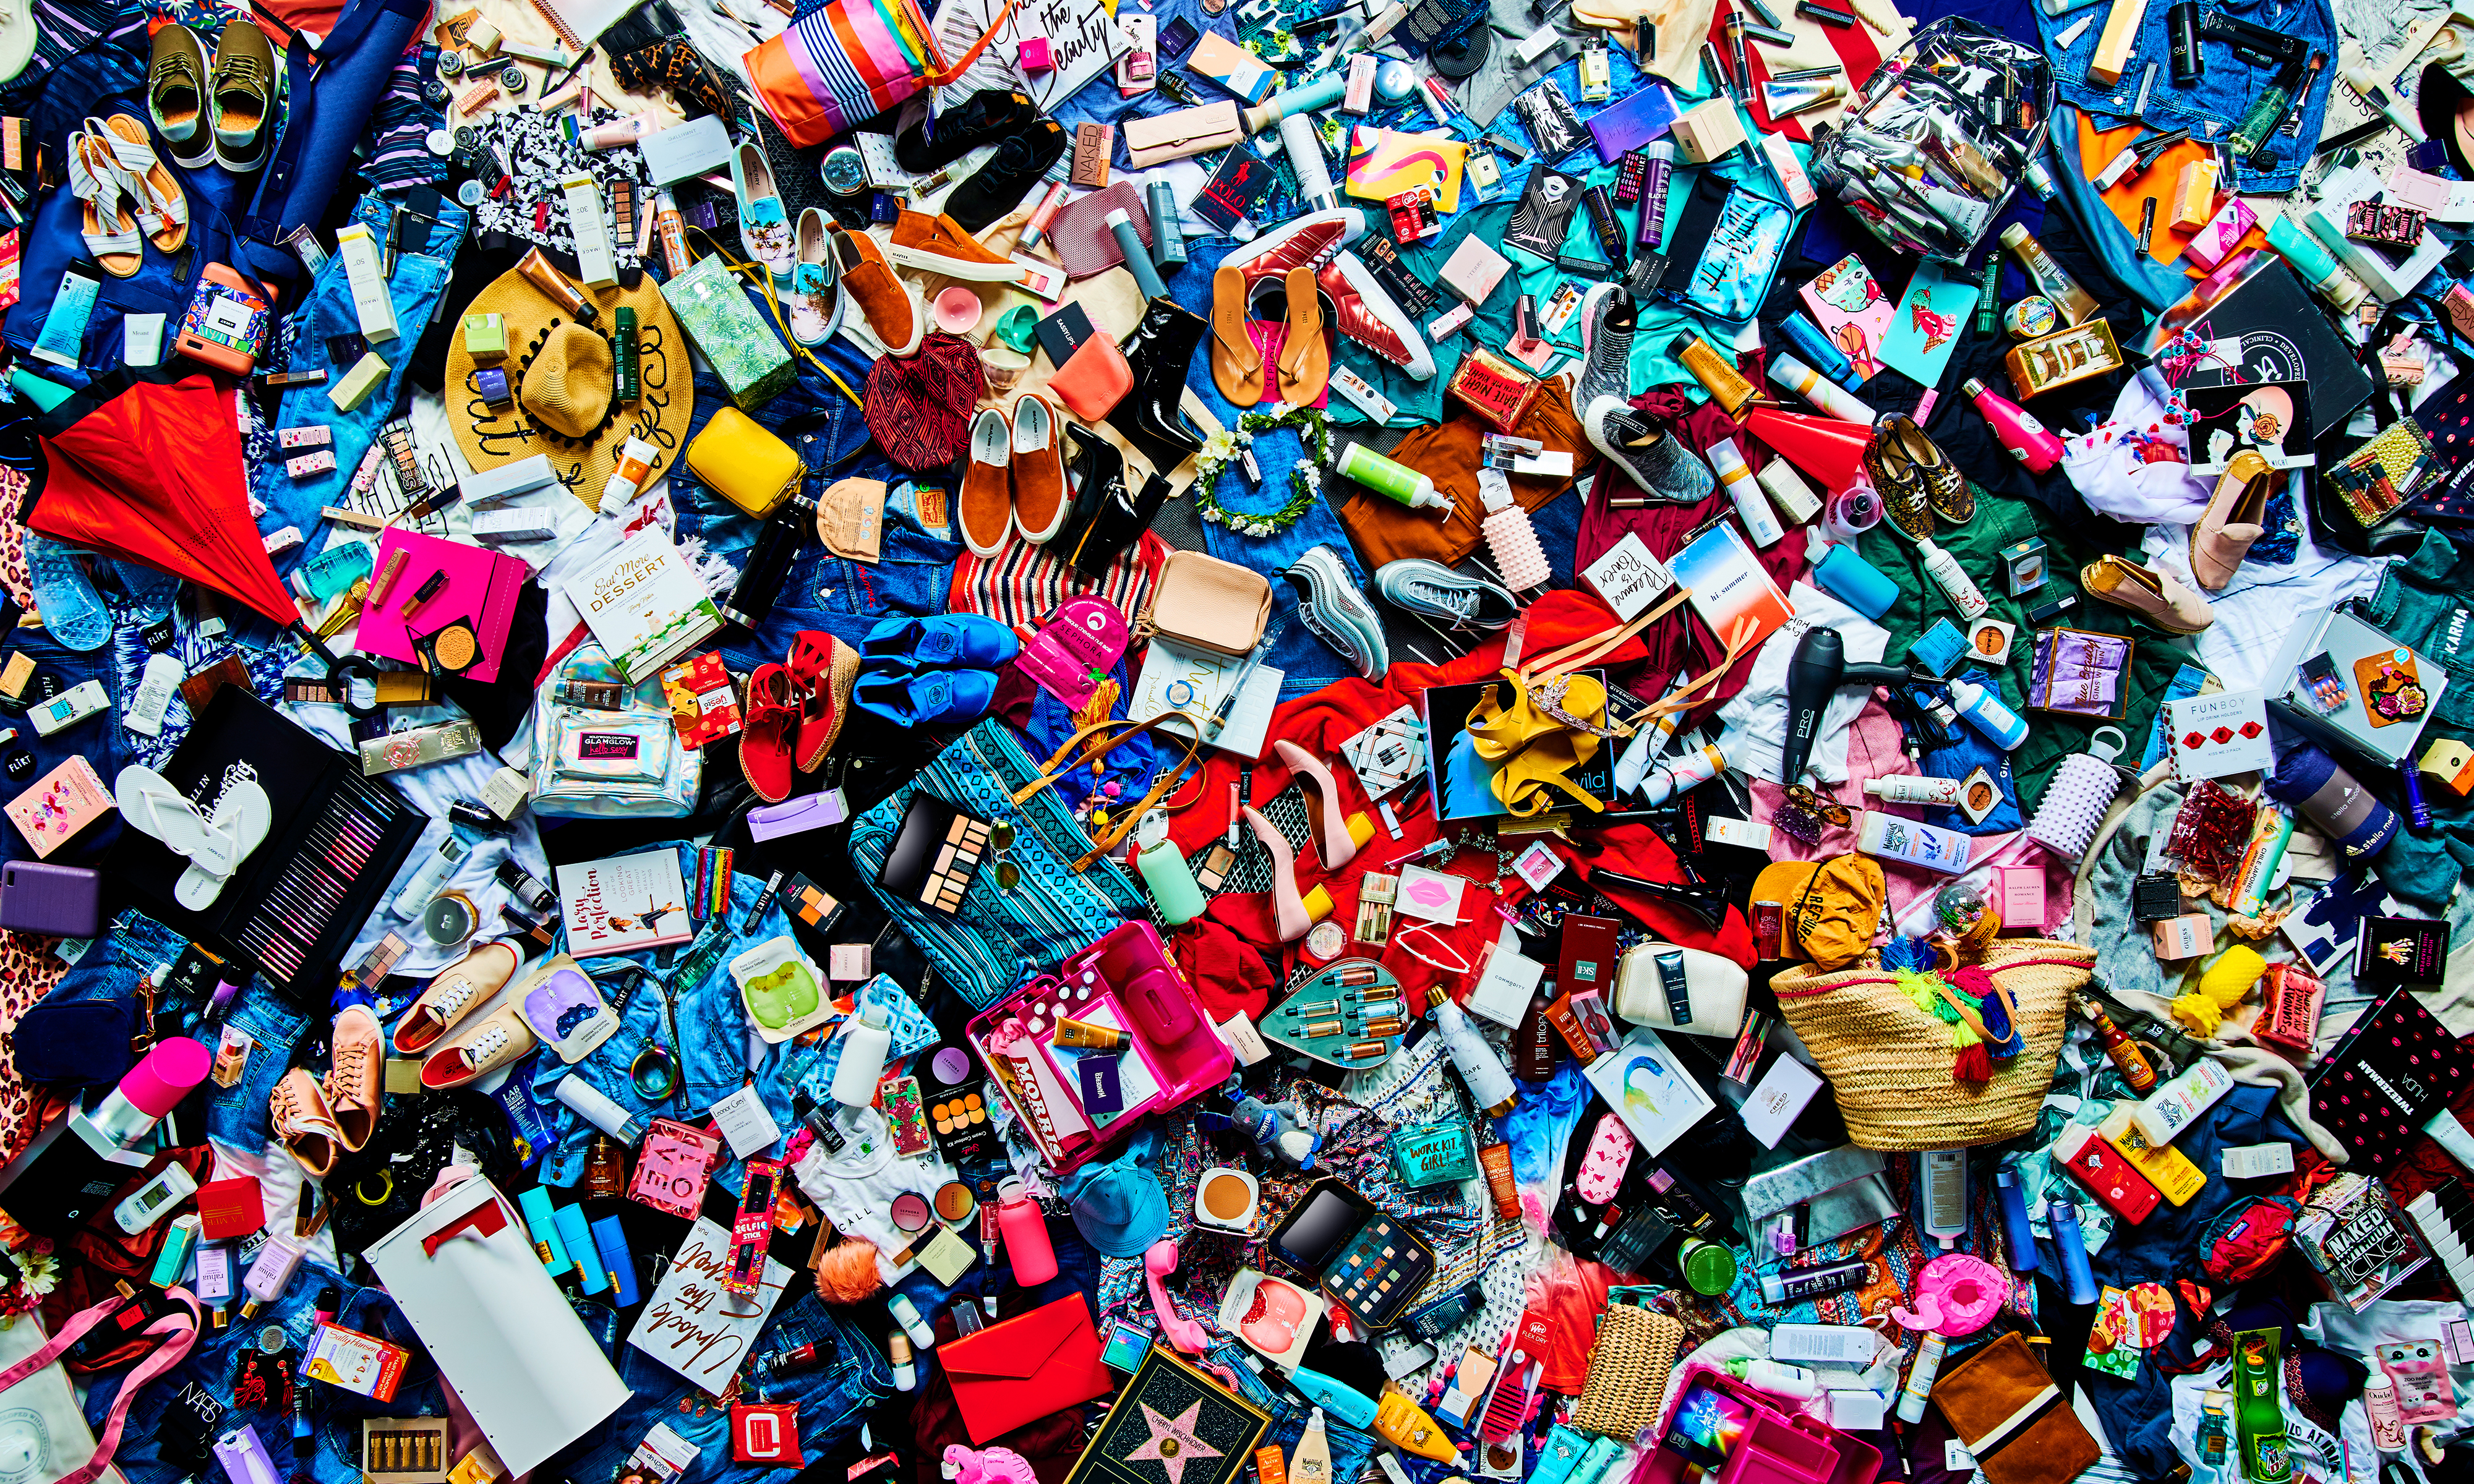 An overhead shot of hundreds of fashion and beauty products.